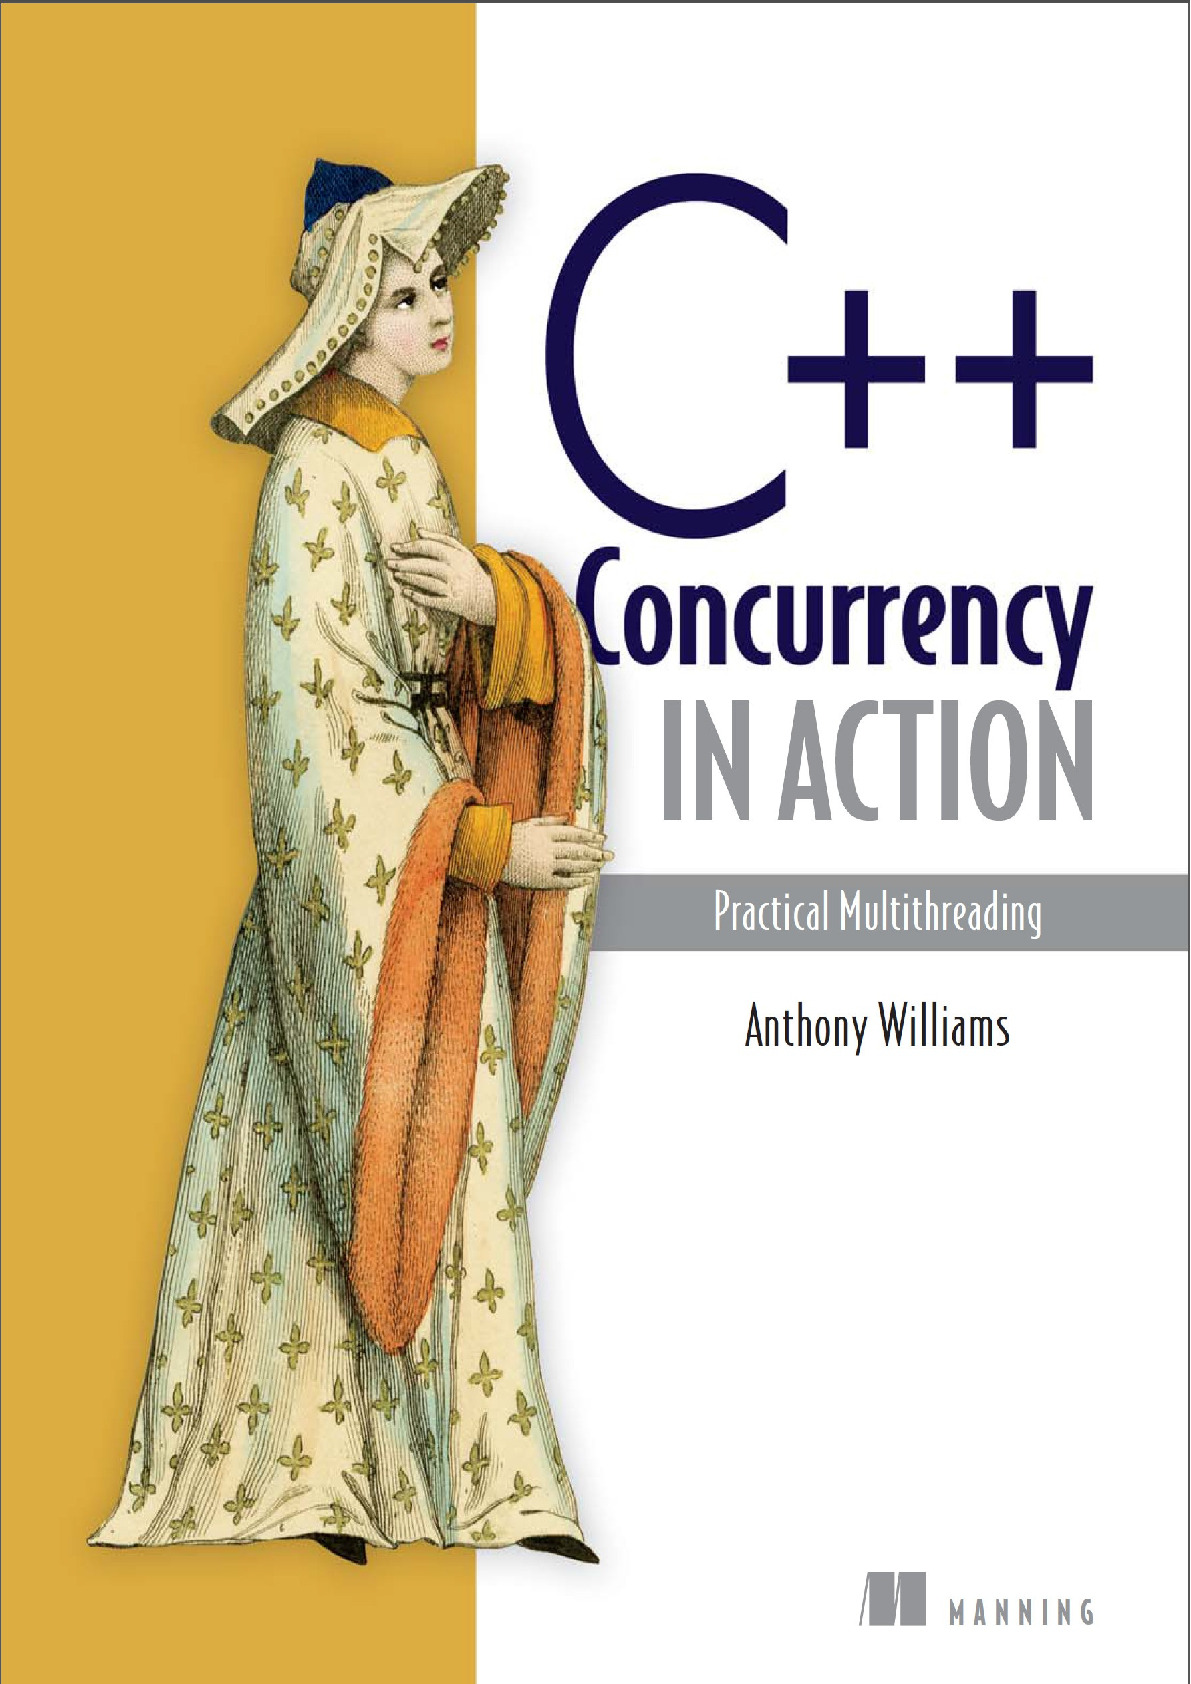 Cpp_Concurrency_In_Action